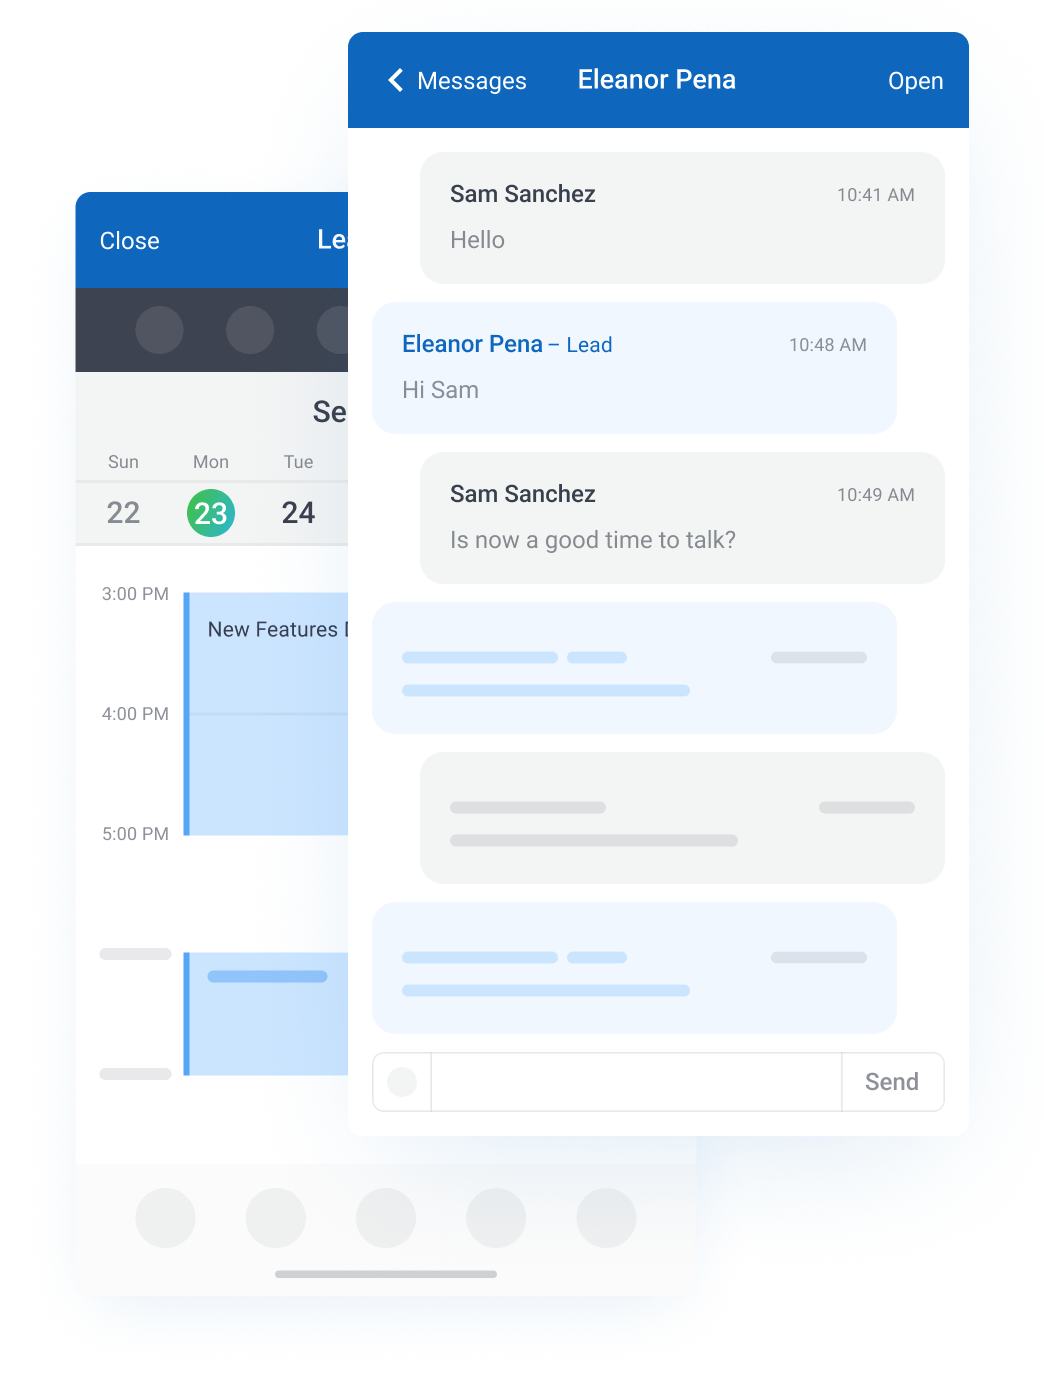 SalesExec sales engagement, lead management app makes it easy for salespeople to call their leads with the click of a button.